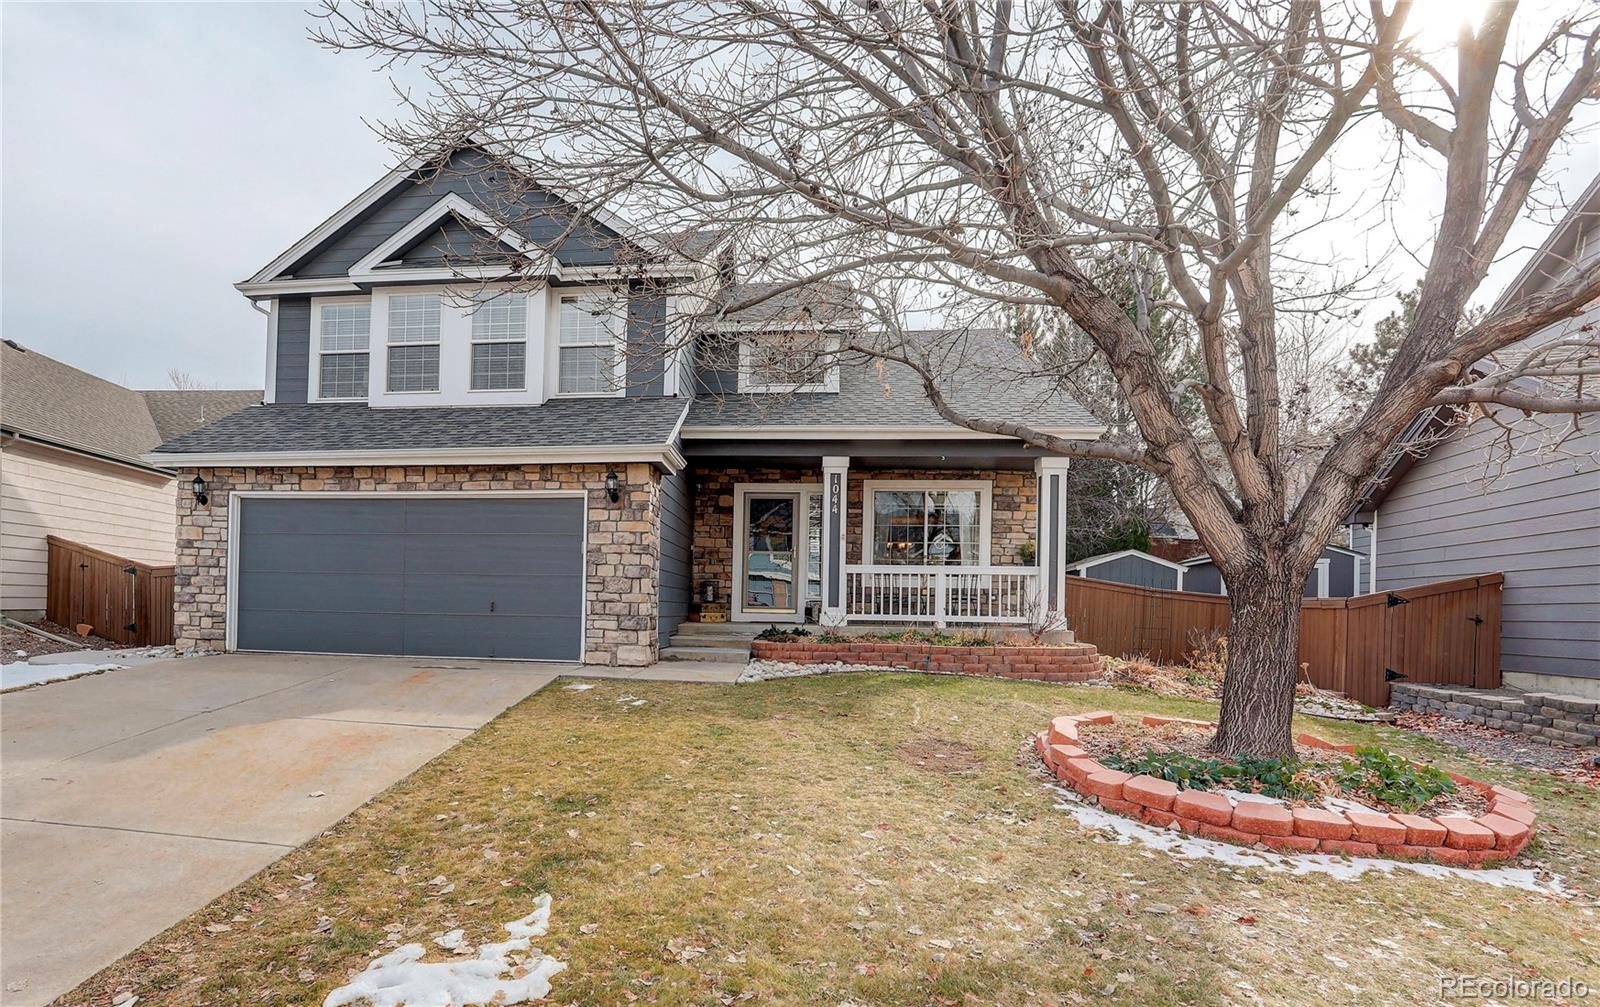 1044  English Sparrow Trail, highlands ranch MLS: 3849576 Beds: 4 Baths: 4 Price: $730,000